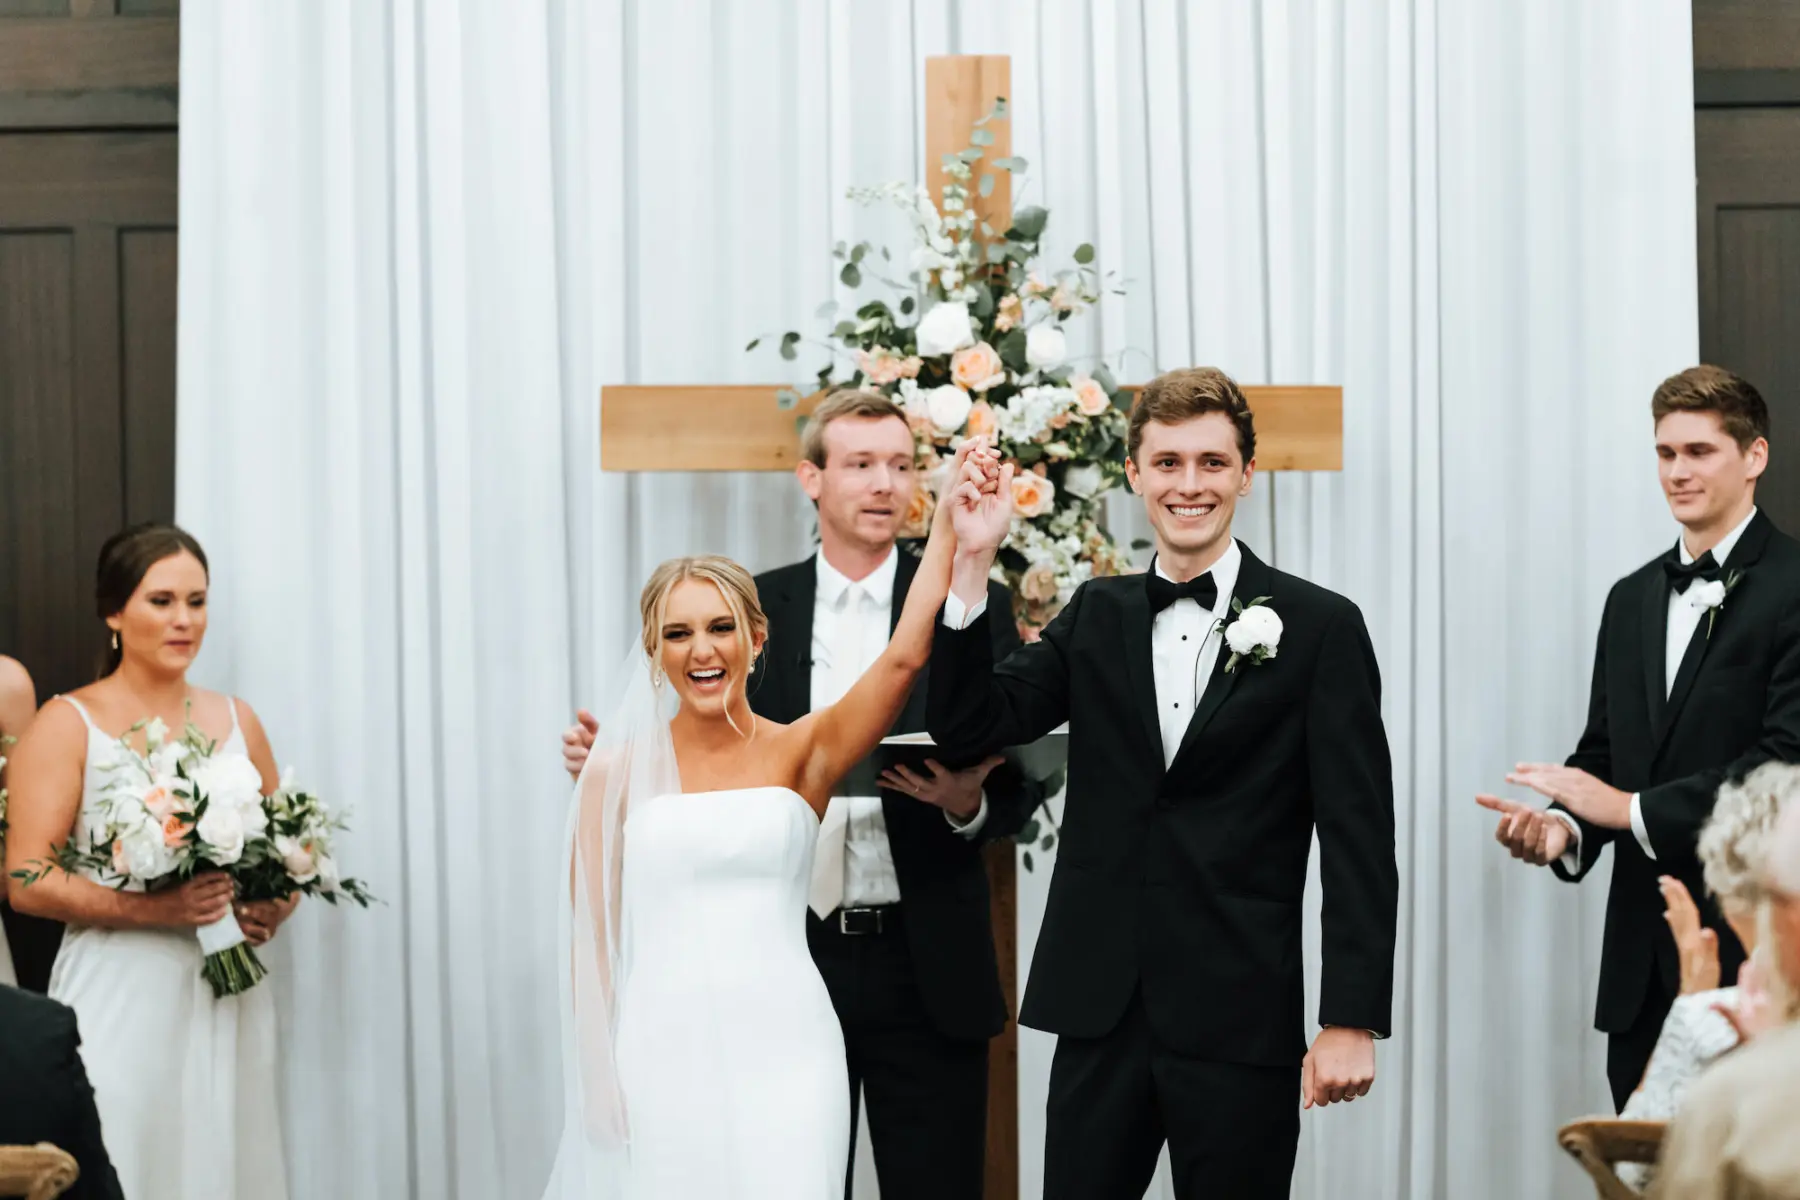 Classic White and Greenery Wedding Ceremony Floral Inspiration with Cross at Altar